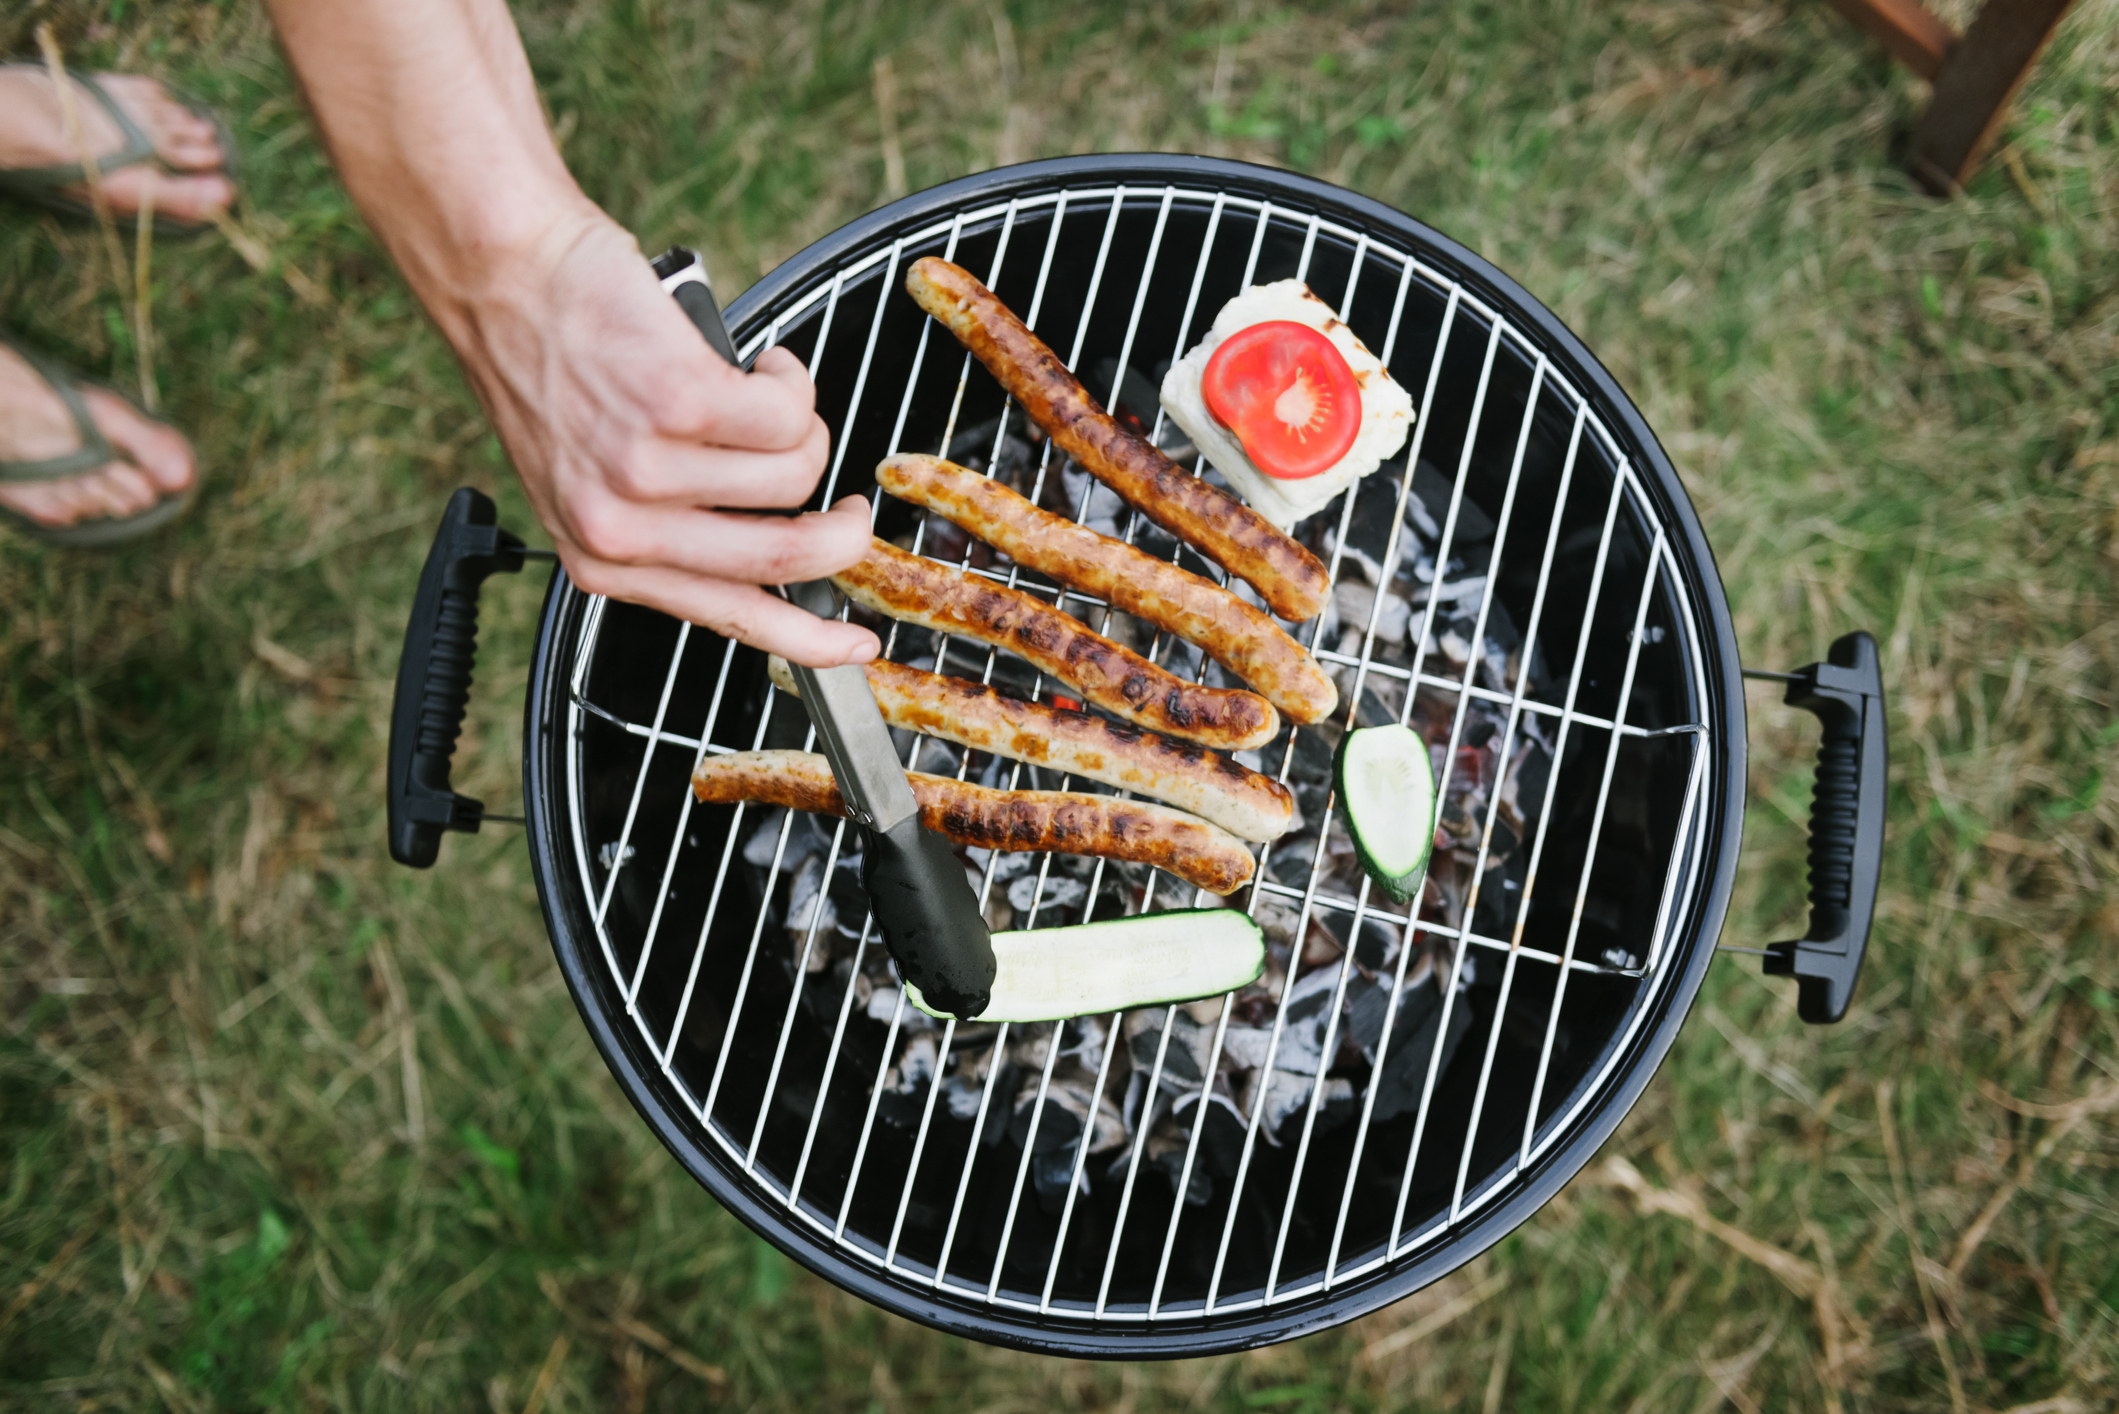 Best Grilling Accessories for Barbecues